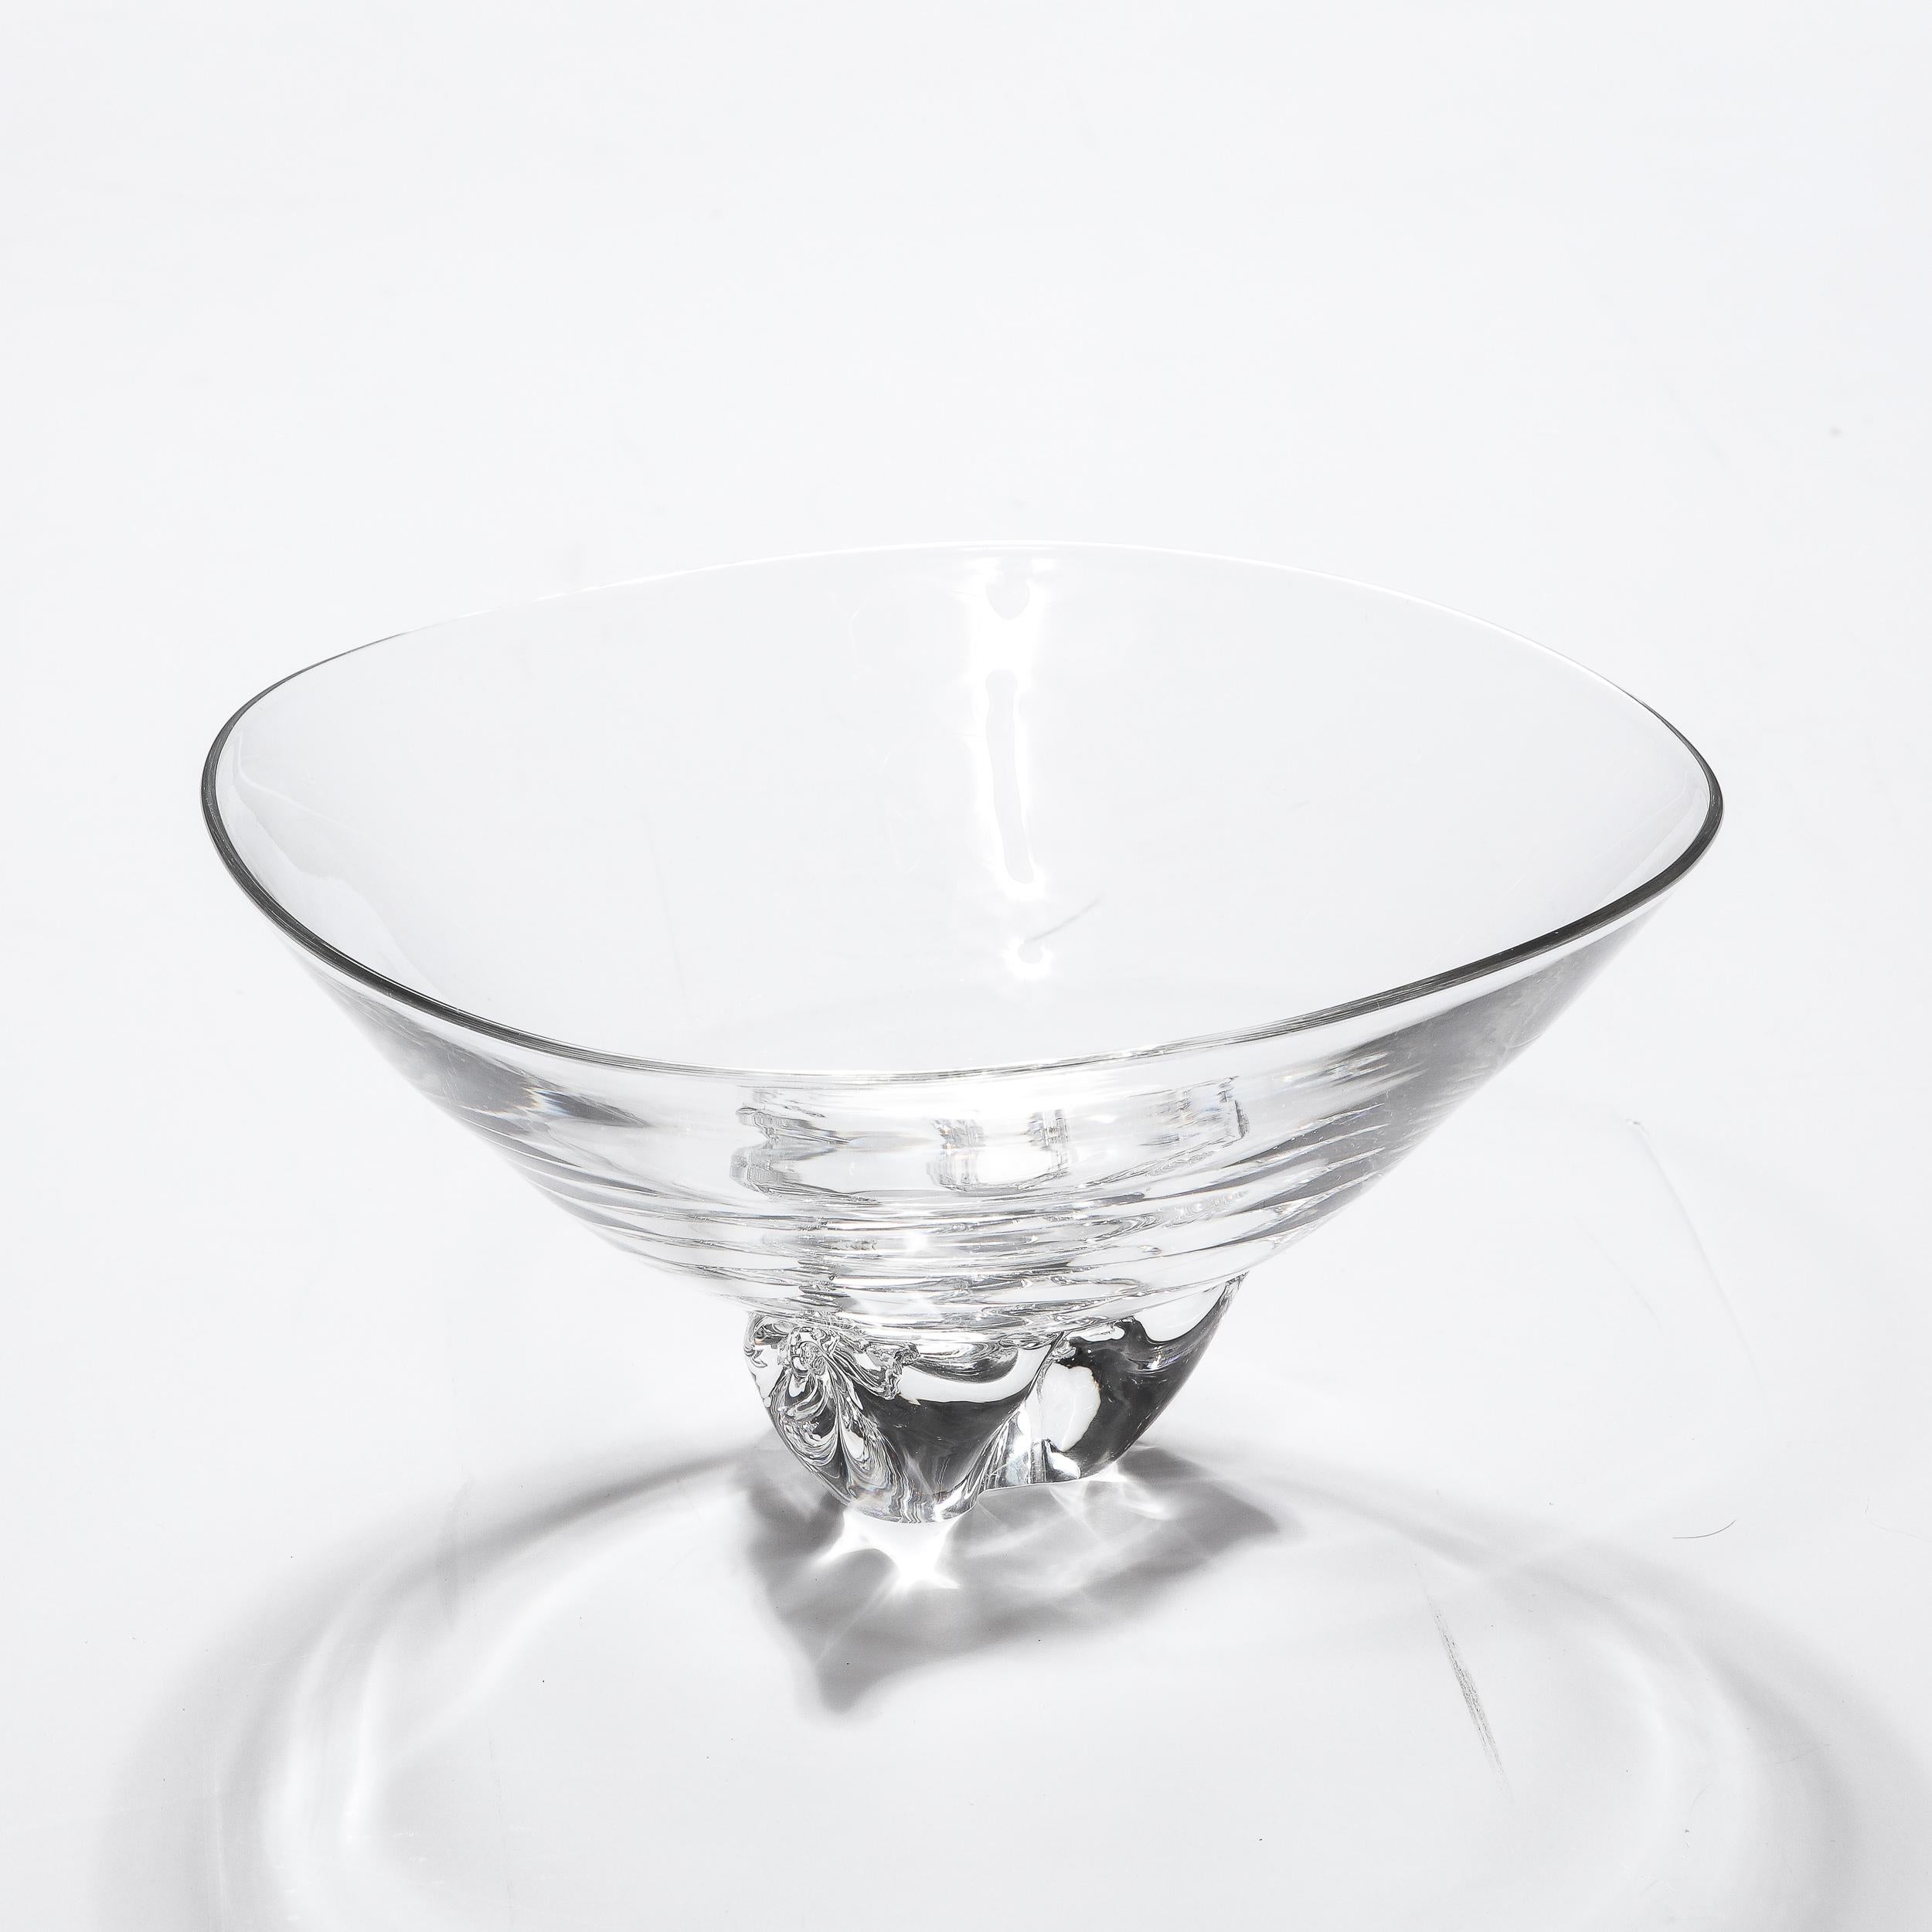 American Mid-Century Modernist Hand-Blown Glass Bowl with Organic Base Signed Steuben For Sale